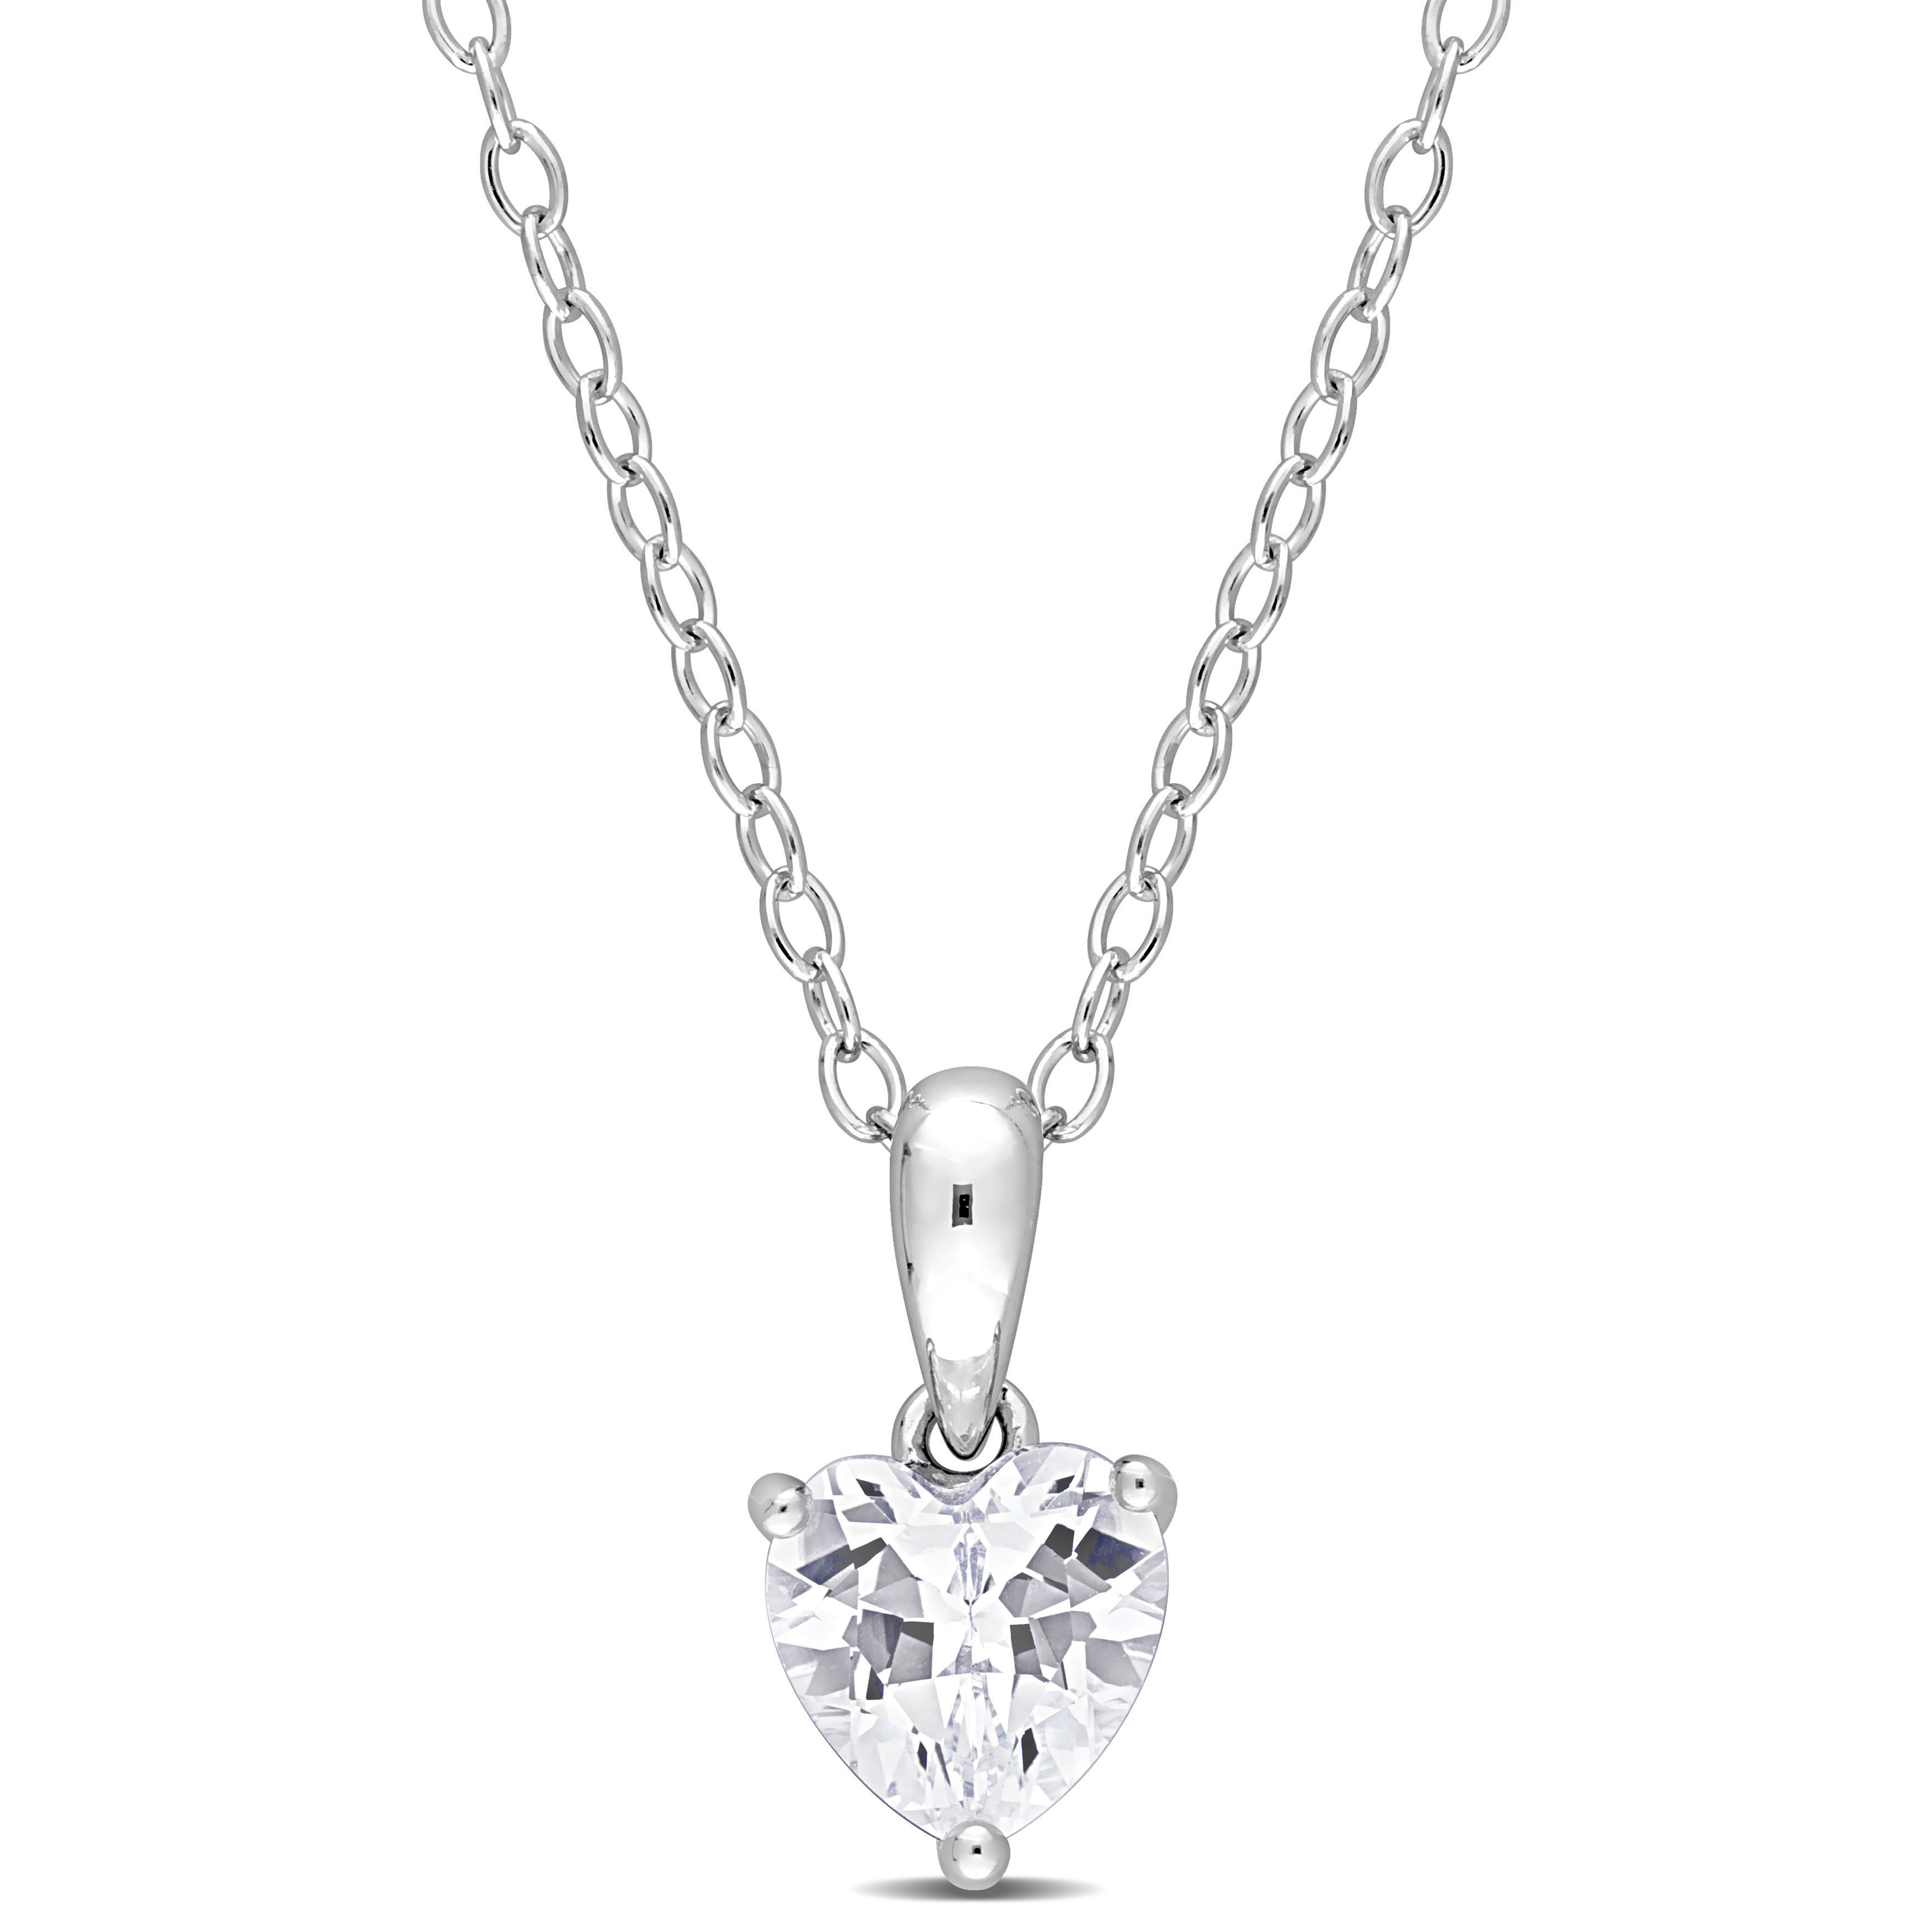 7/8 CT TGW Heart Shape Created White Sapphire Solitaire Heart Design Pendant with Chain in Sterling Silver - 18 in.